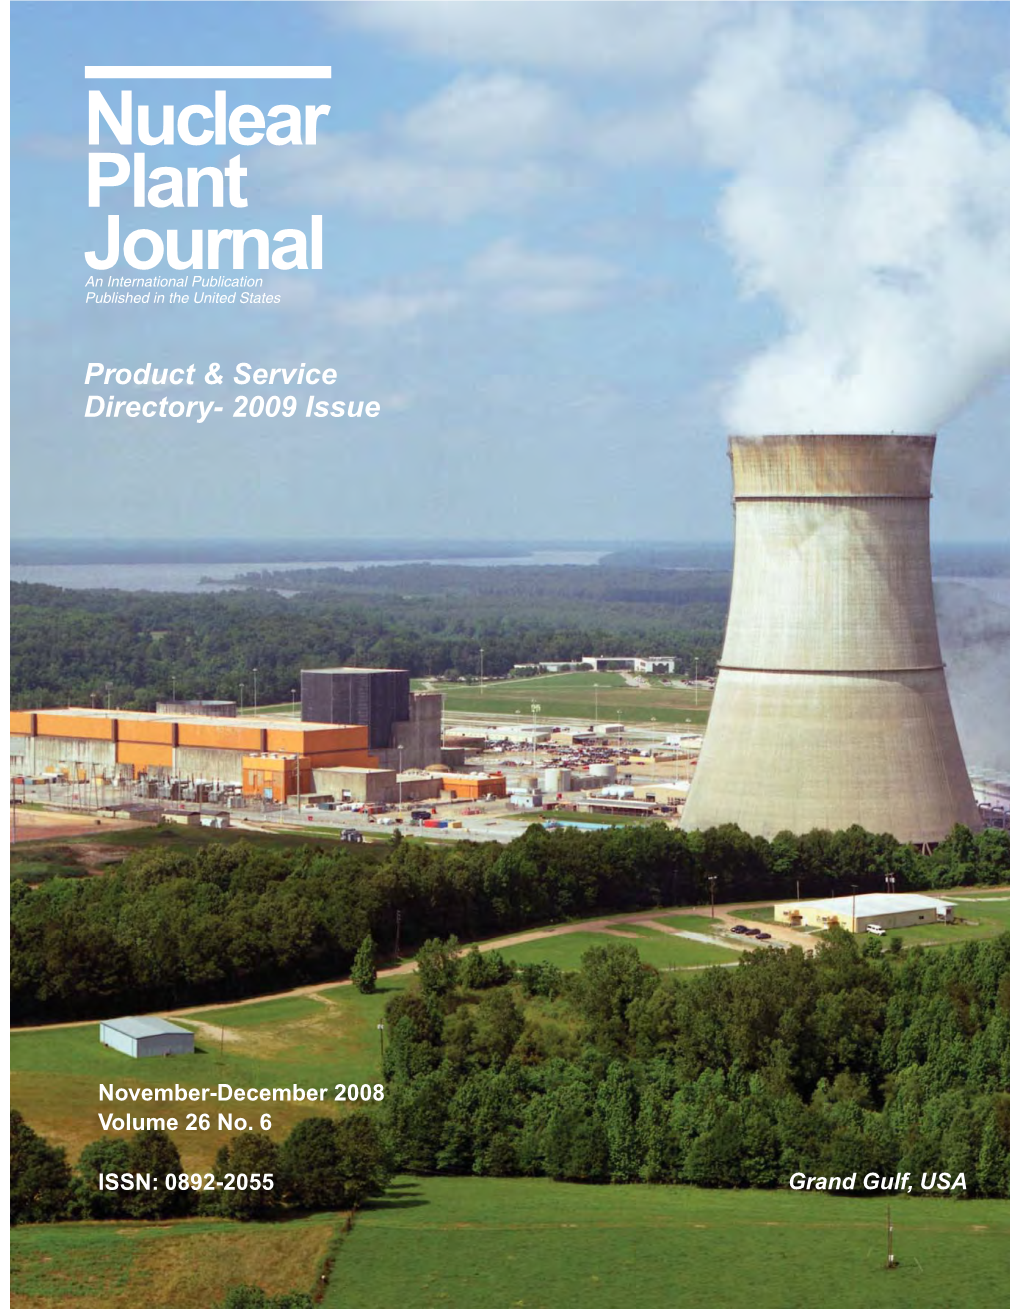 Nuclear Plant Journal Product & Service Directory 2009